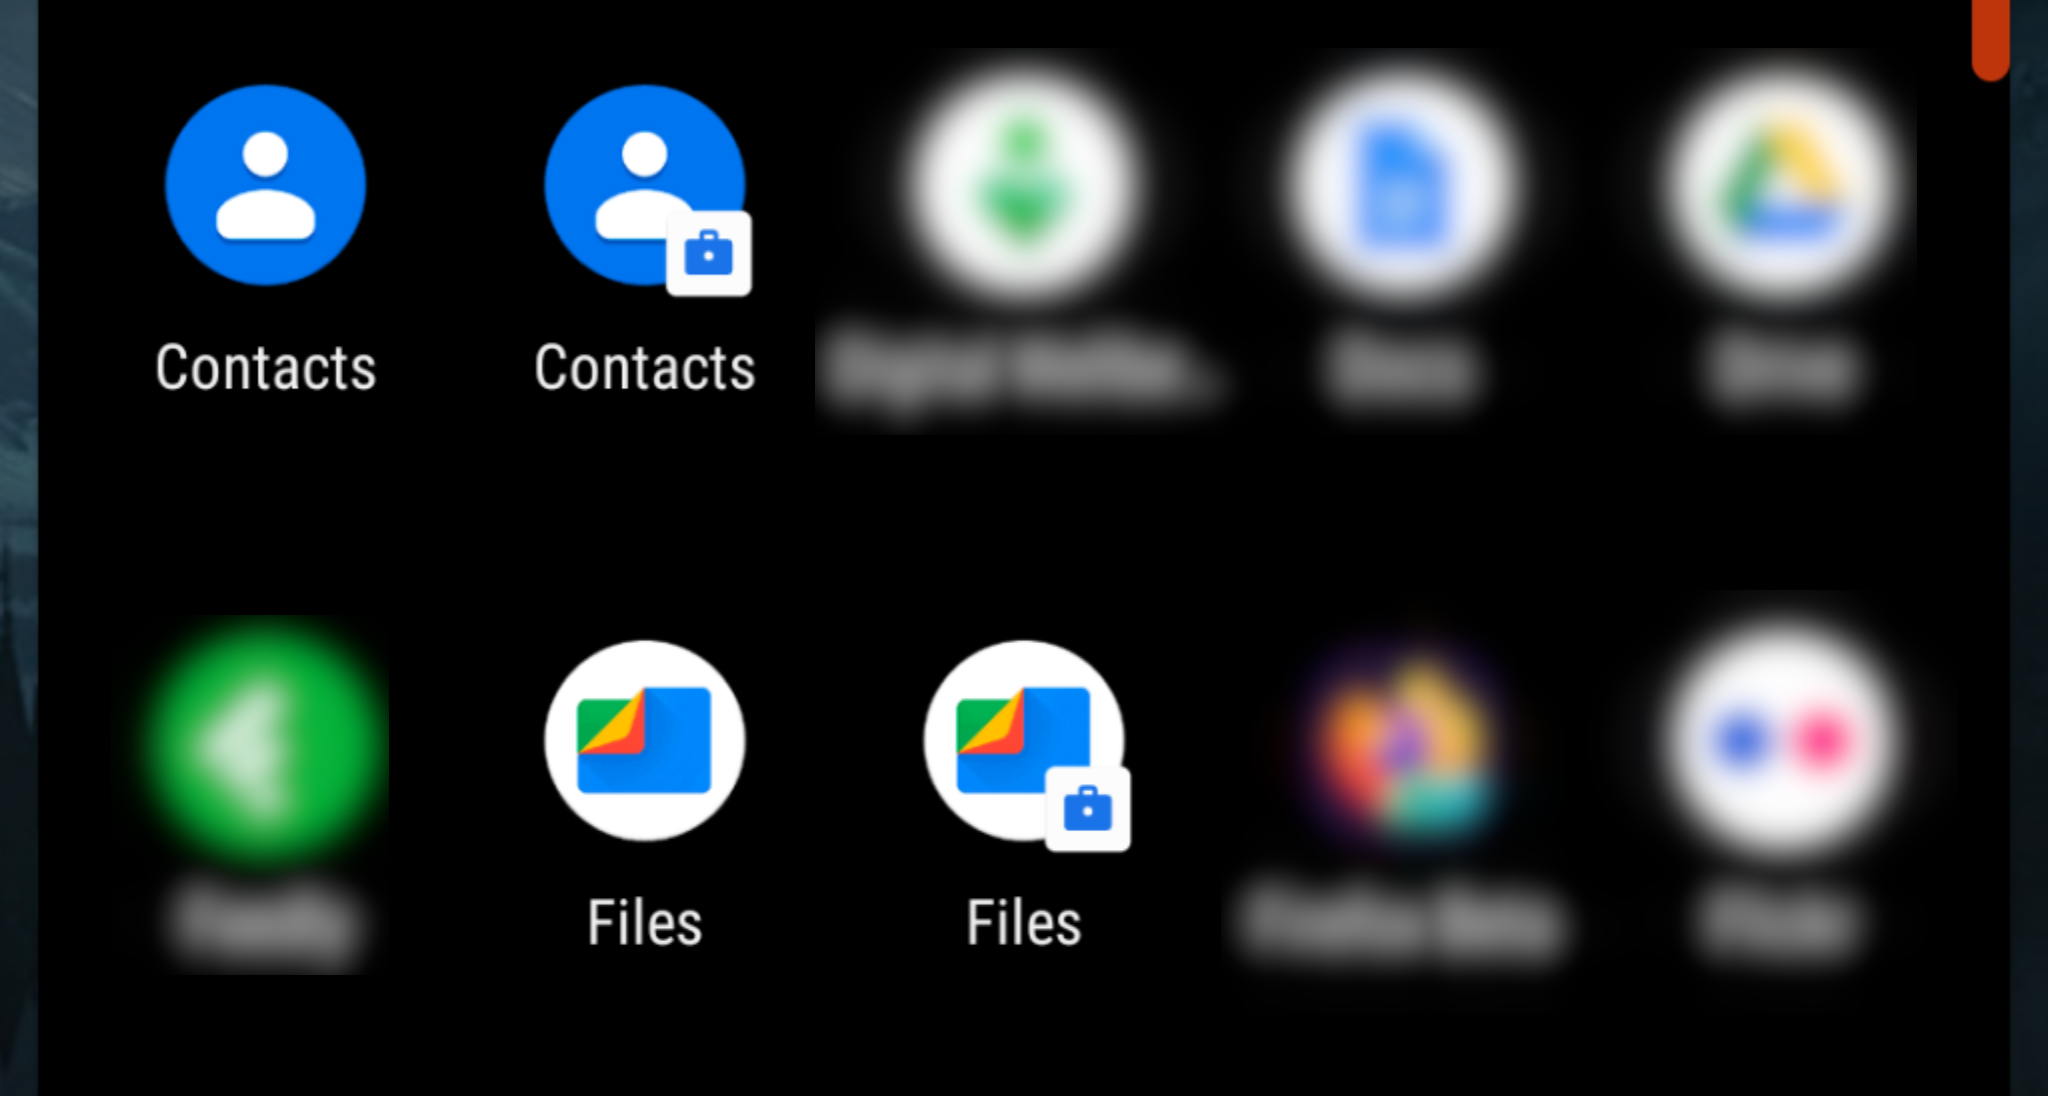 Work Profile apps have a briefcase icon